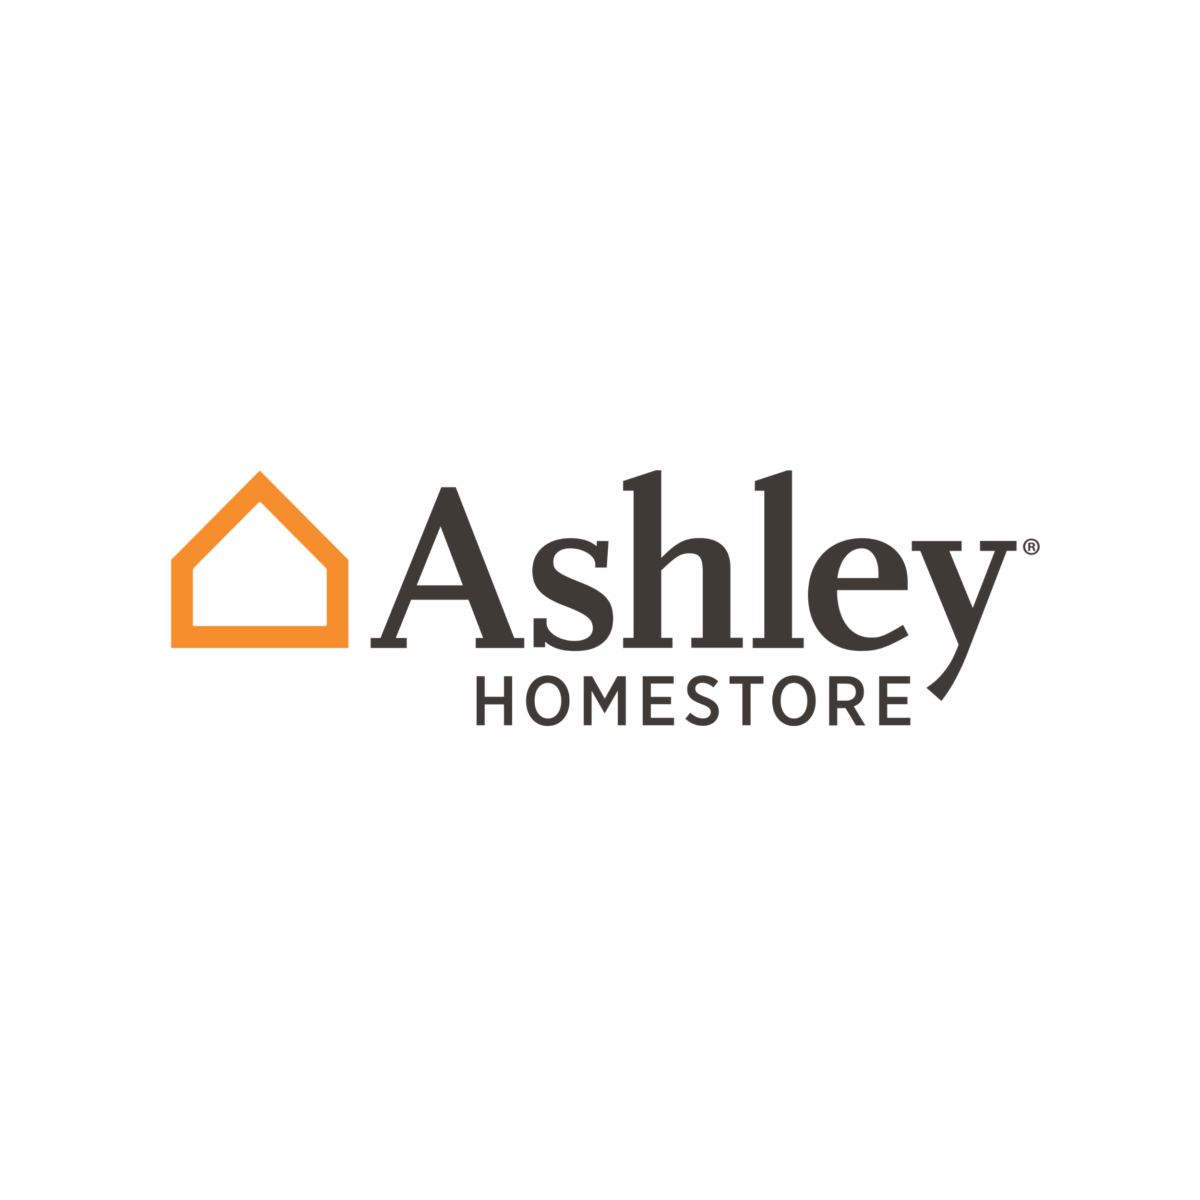 Ashley Furniture Homestore - HORSFORD'S Group of Companies